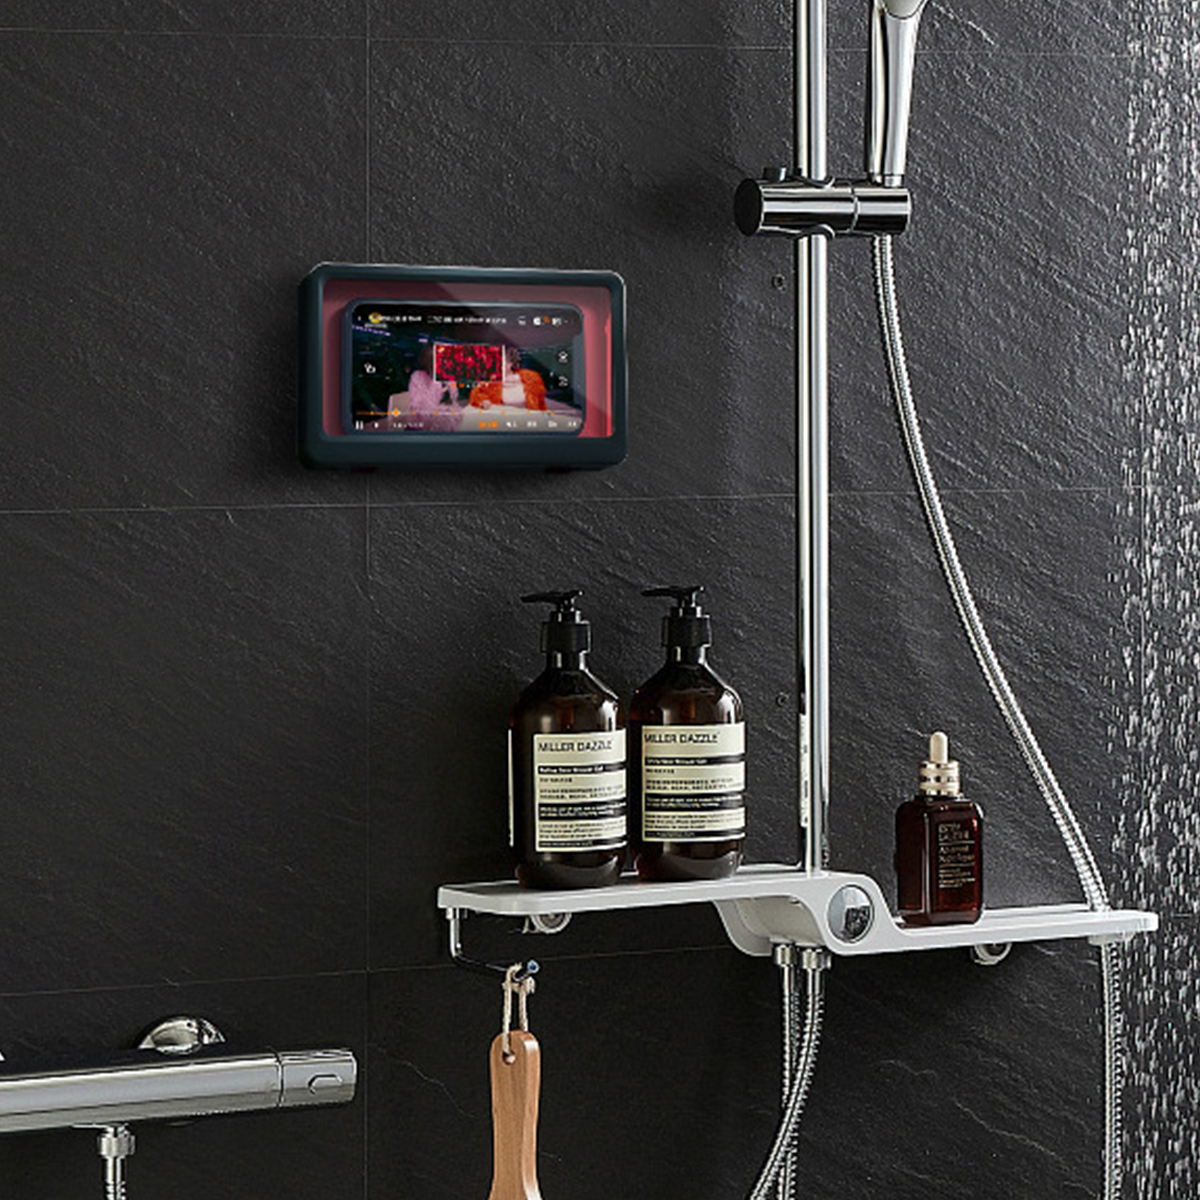 Bathroom-Waterproof-Touch-Screen-Mobile-Cell-Phone-Holder-Case-Wall-Mount-Storage-Box-Under-68-inche-1750862-12